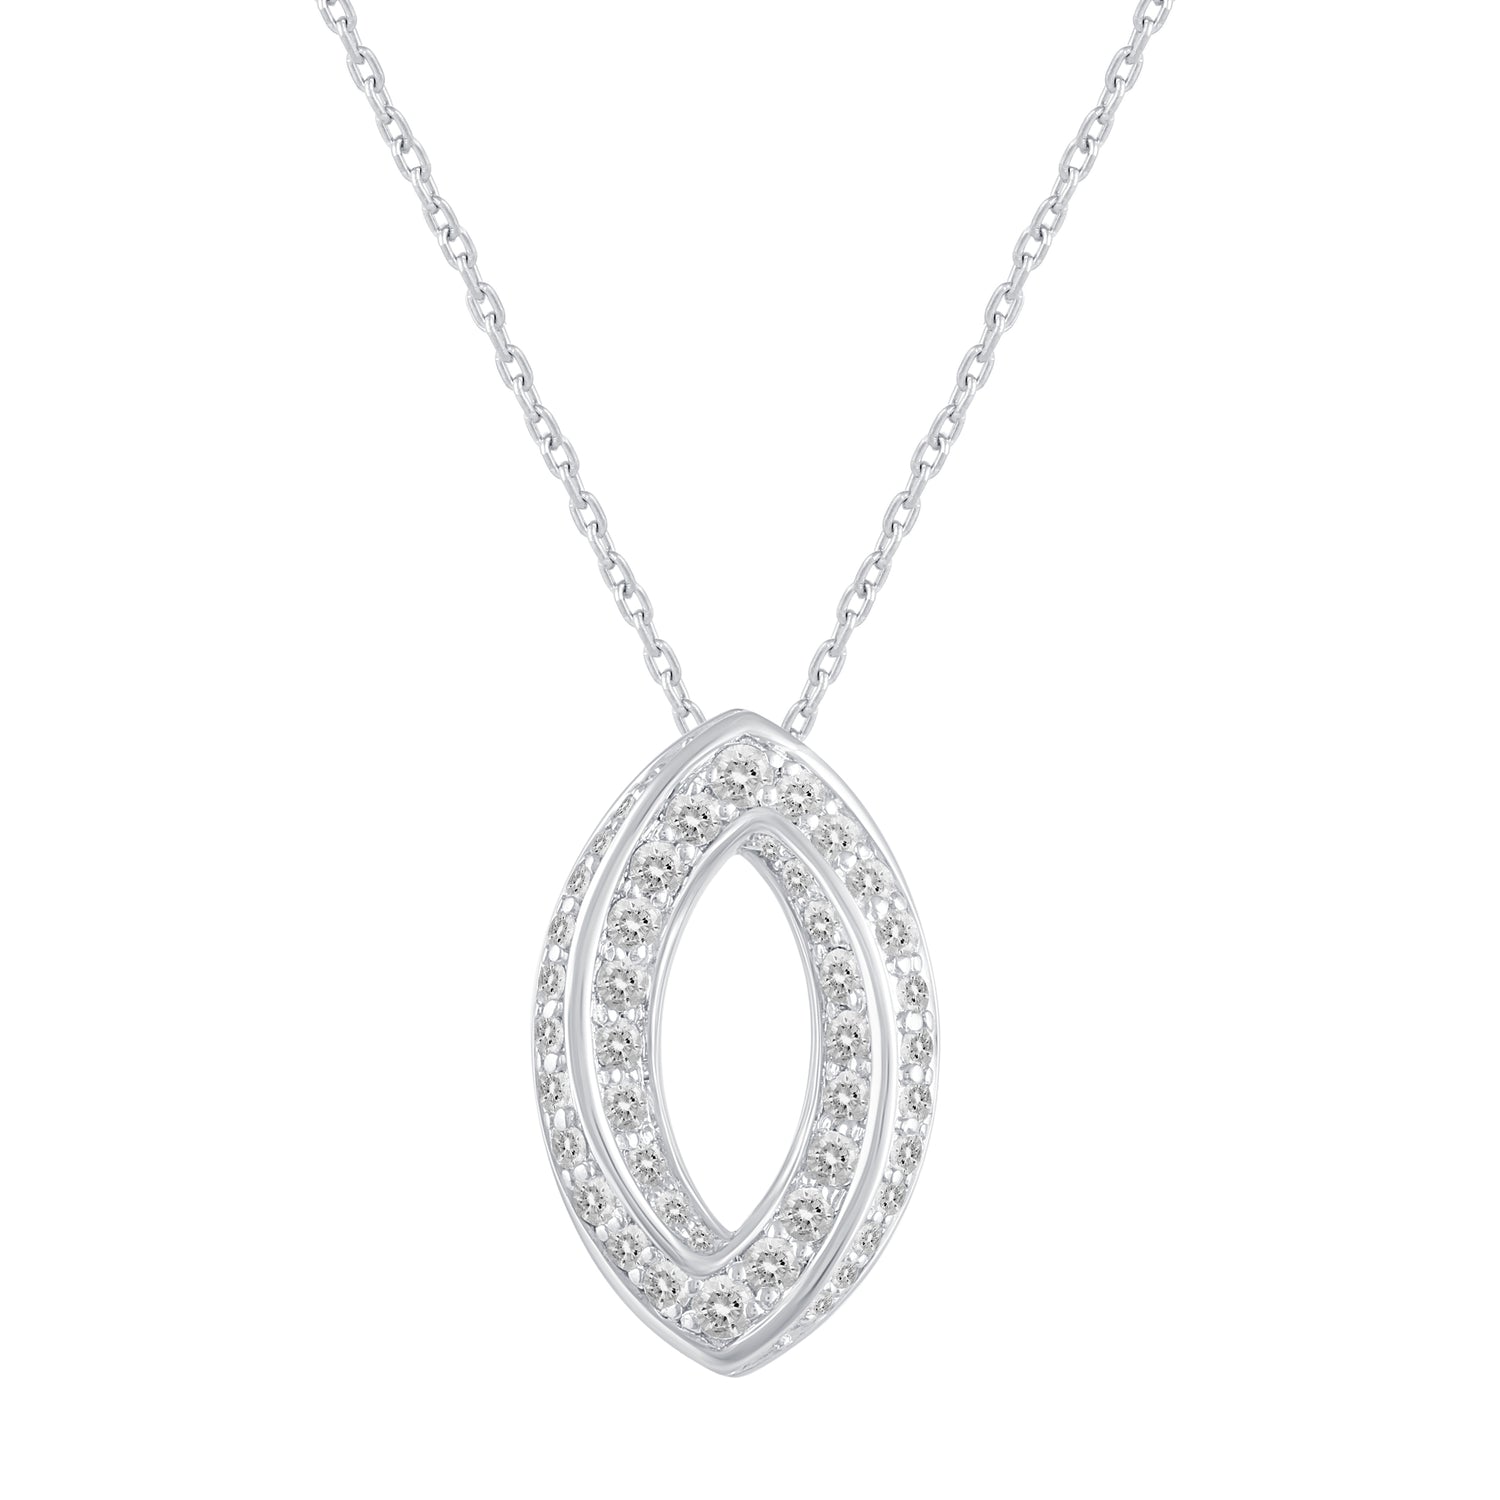 1/2 Cttw Diamond Open Pave Twisted Pendant Necklace set in 925 Sterling Silver (Select Design) oval round square marquise